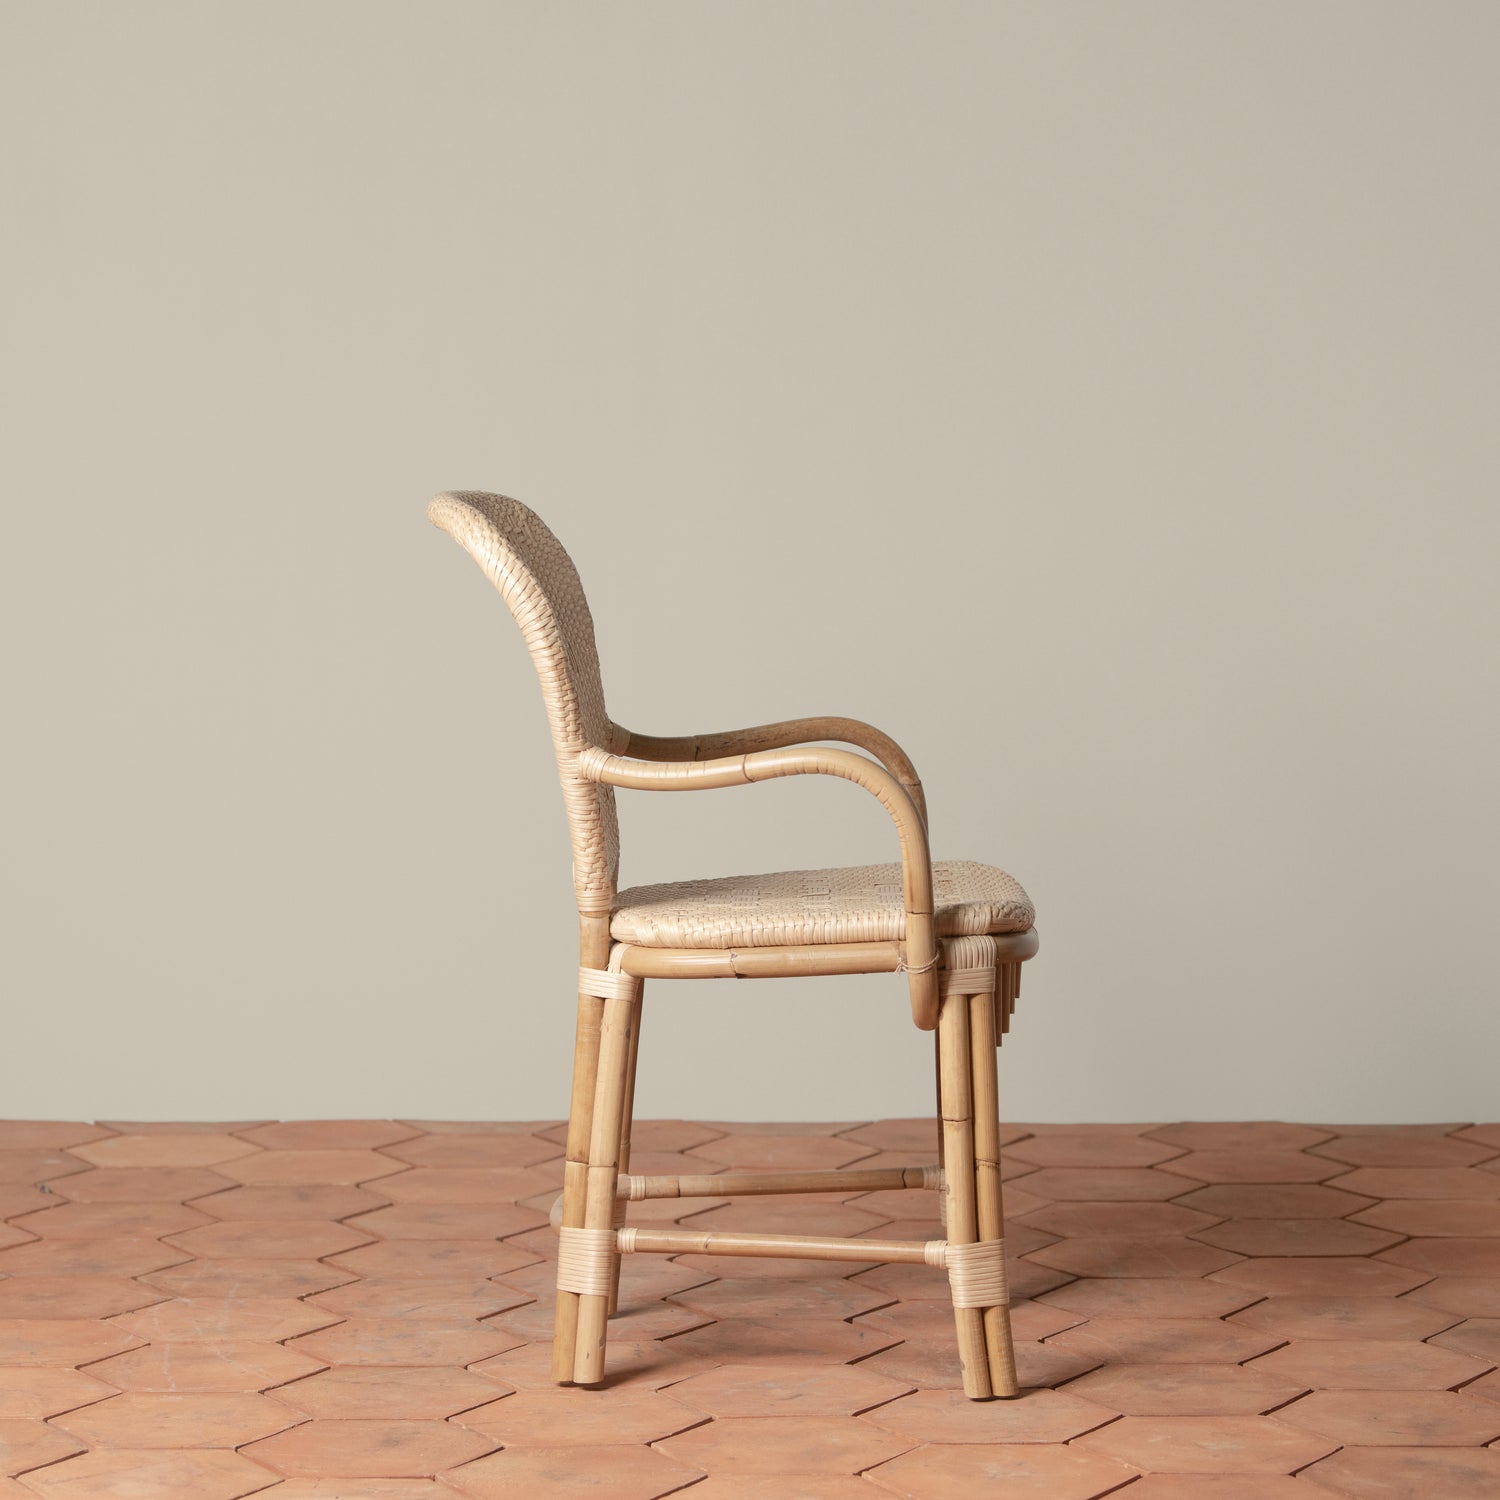 On an ivory background is a rattan chair with a woven rattan seat and backrest.